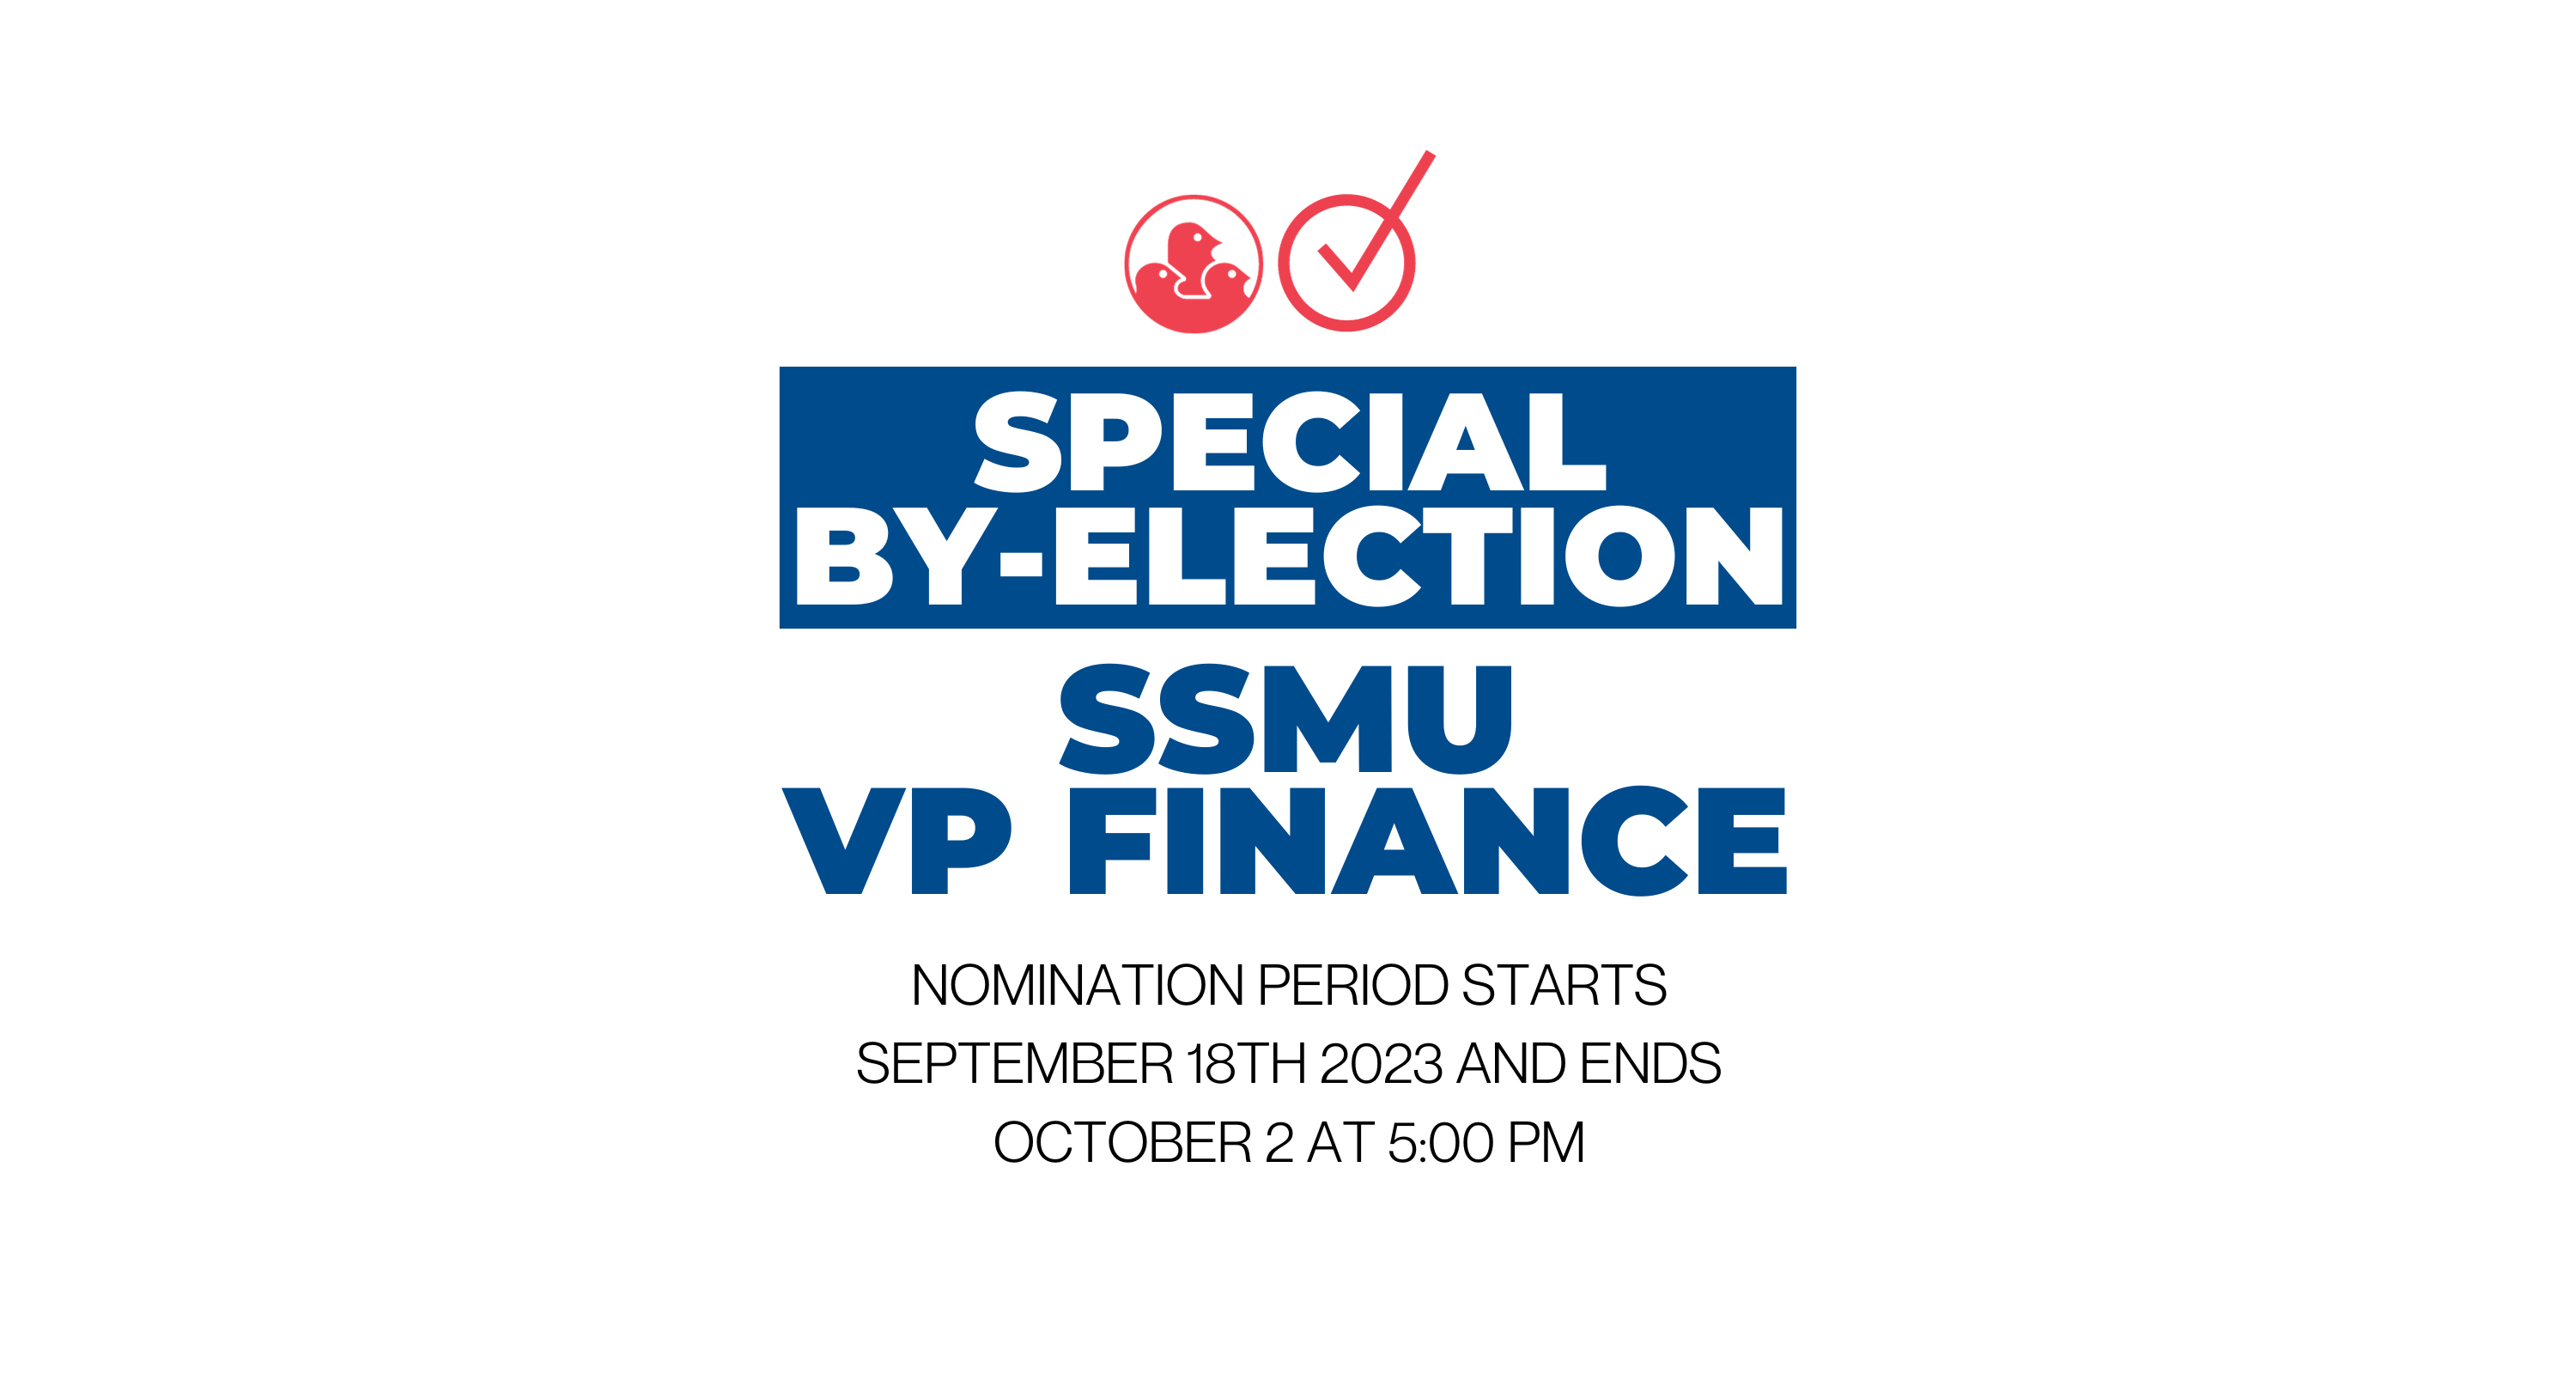 SSMU Vice President Finance - Nomination period is open